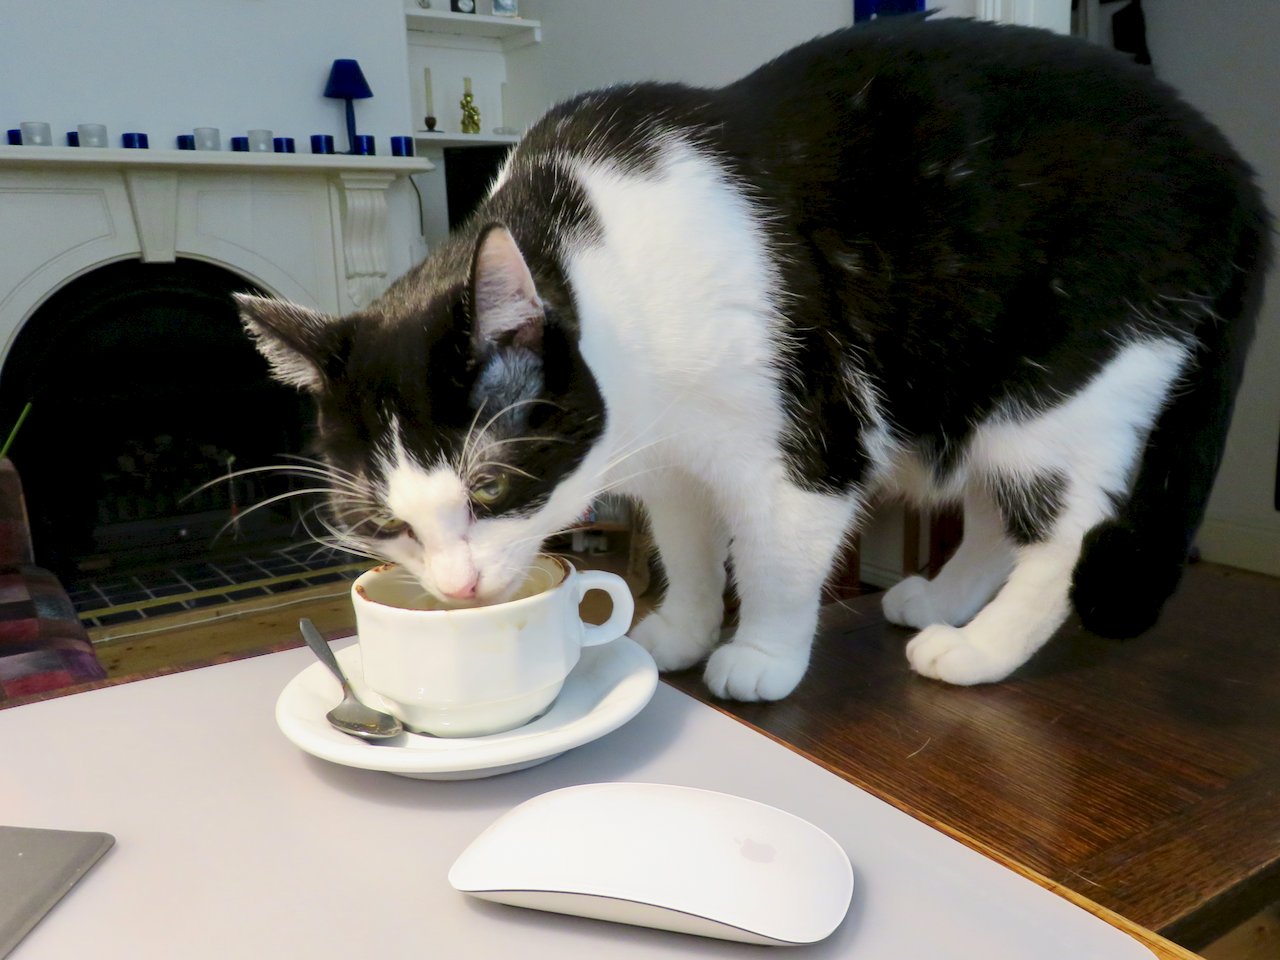 a black and white cat giving us a pert look as she is sprung licking the chocolate off the top of a cappuccino cup